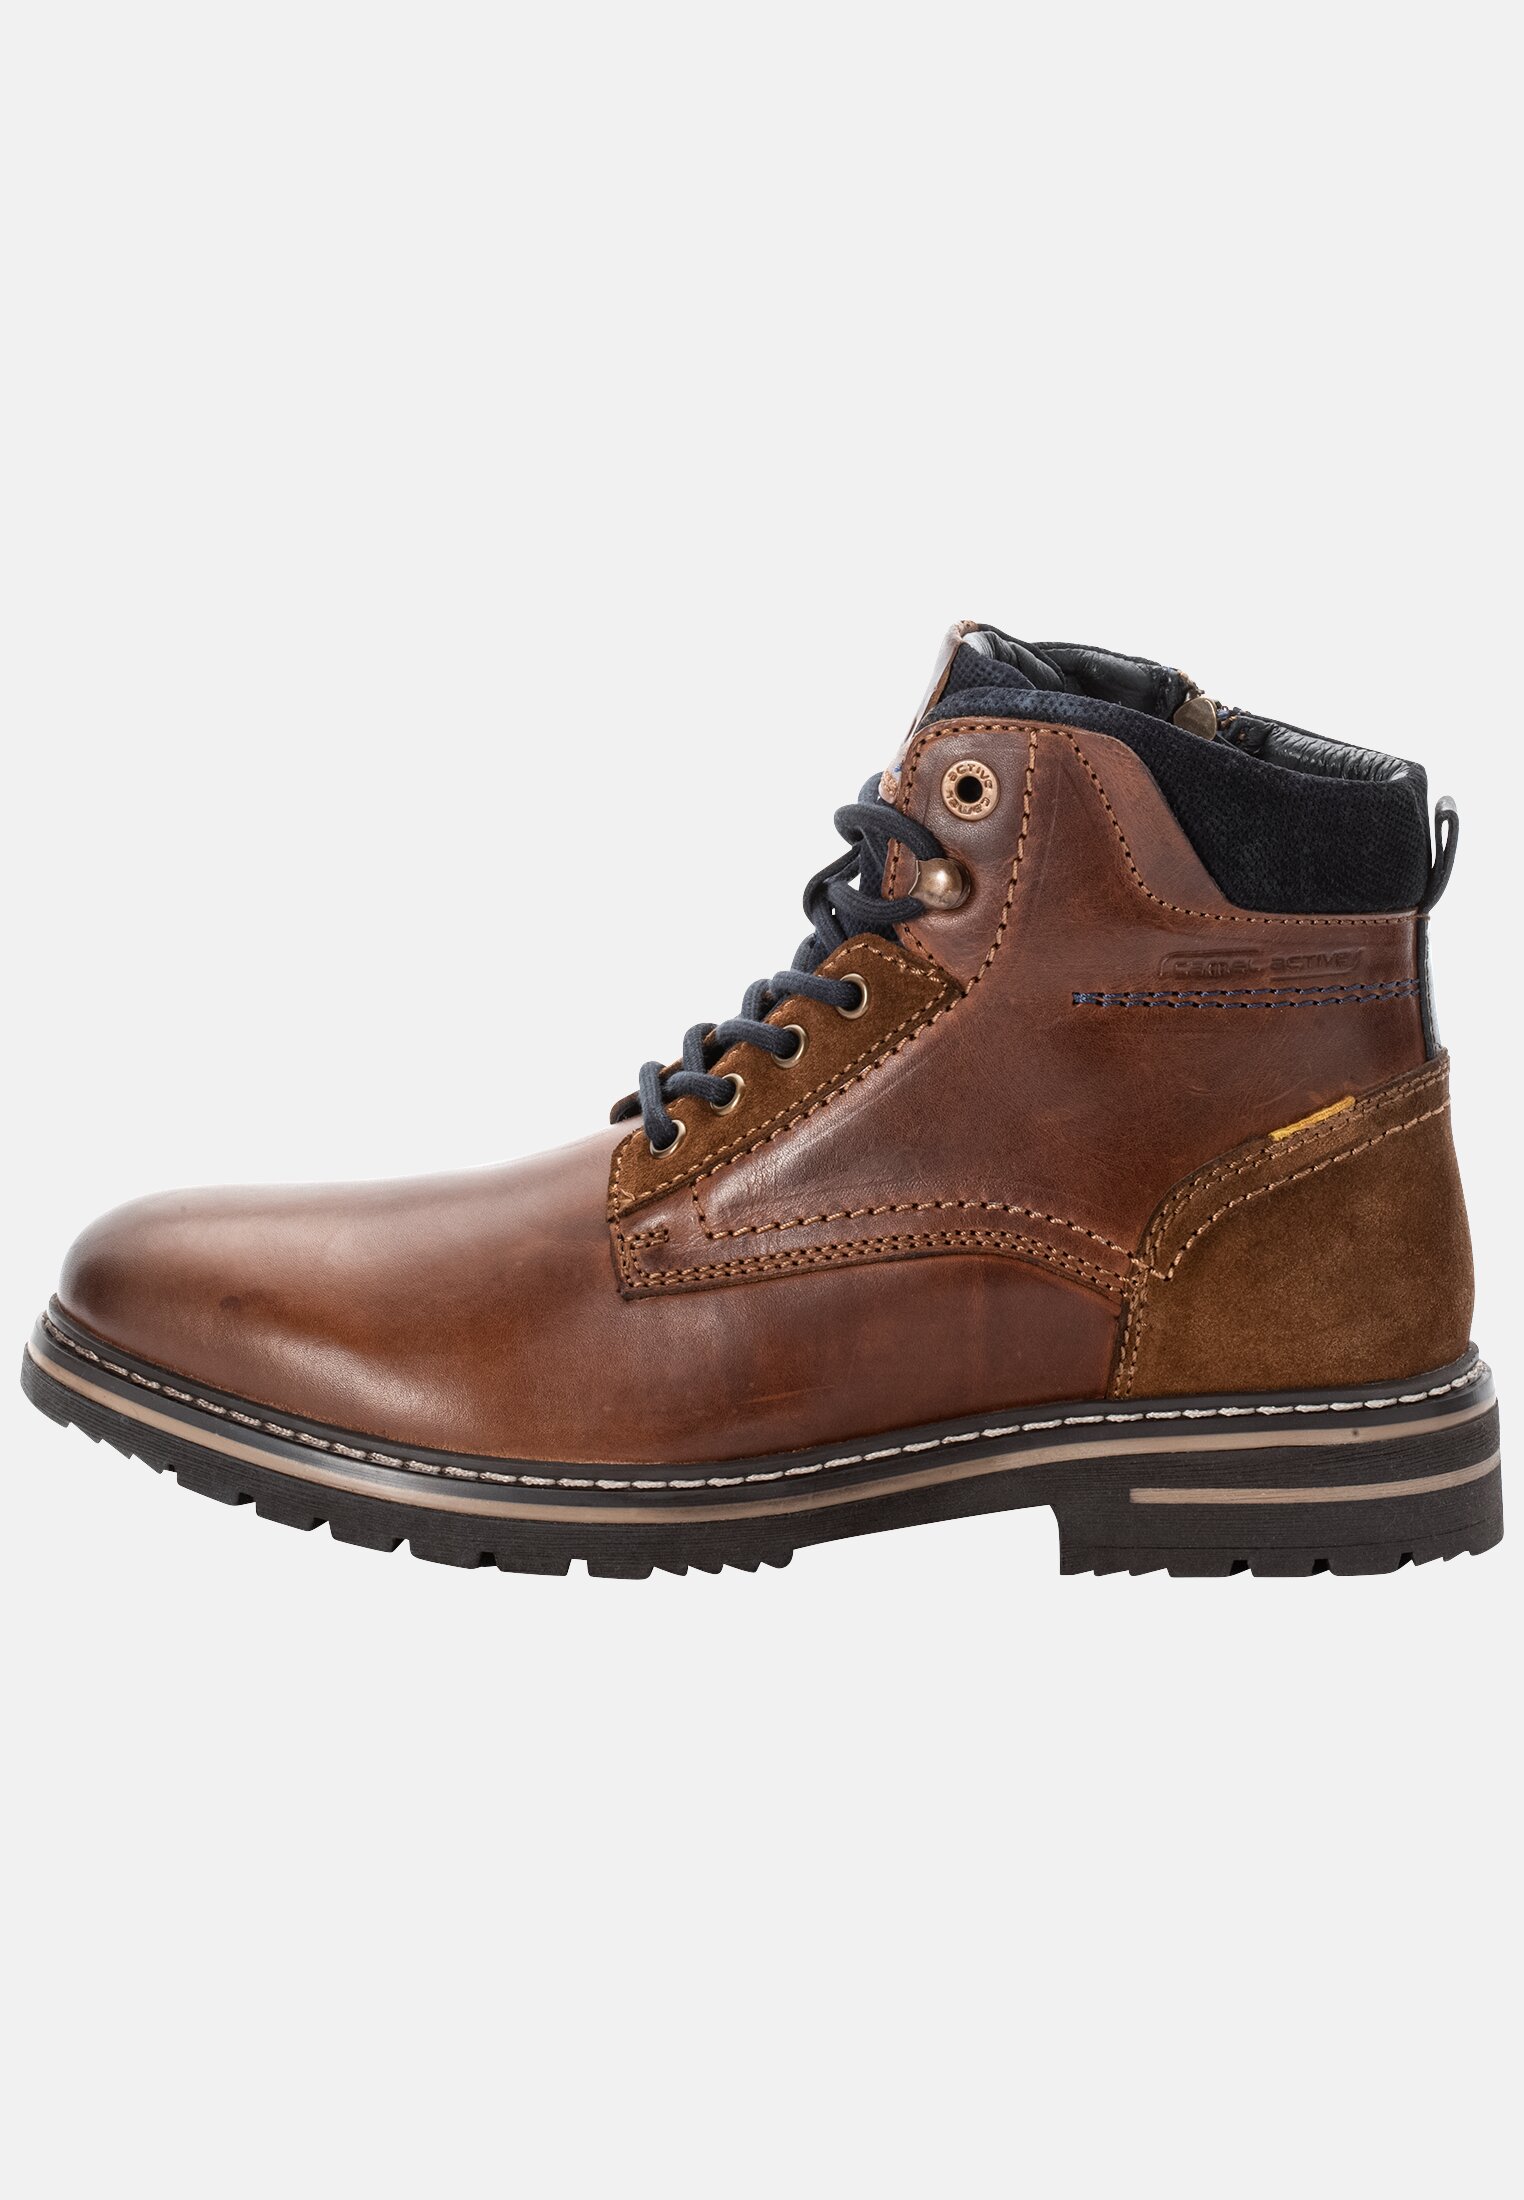 Camel Active Lace-up boot in genuine leather